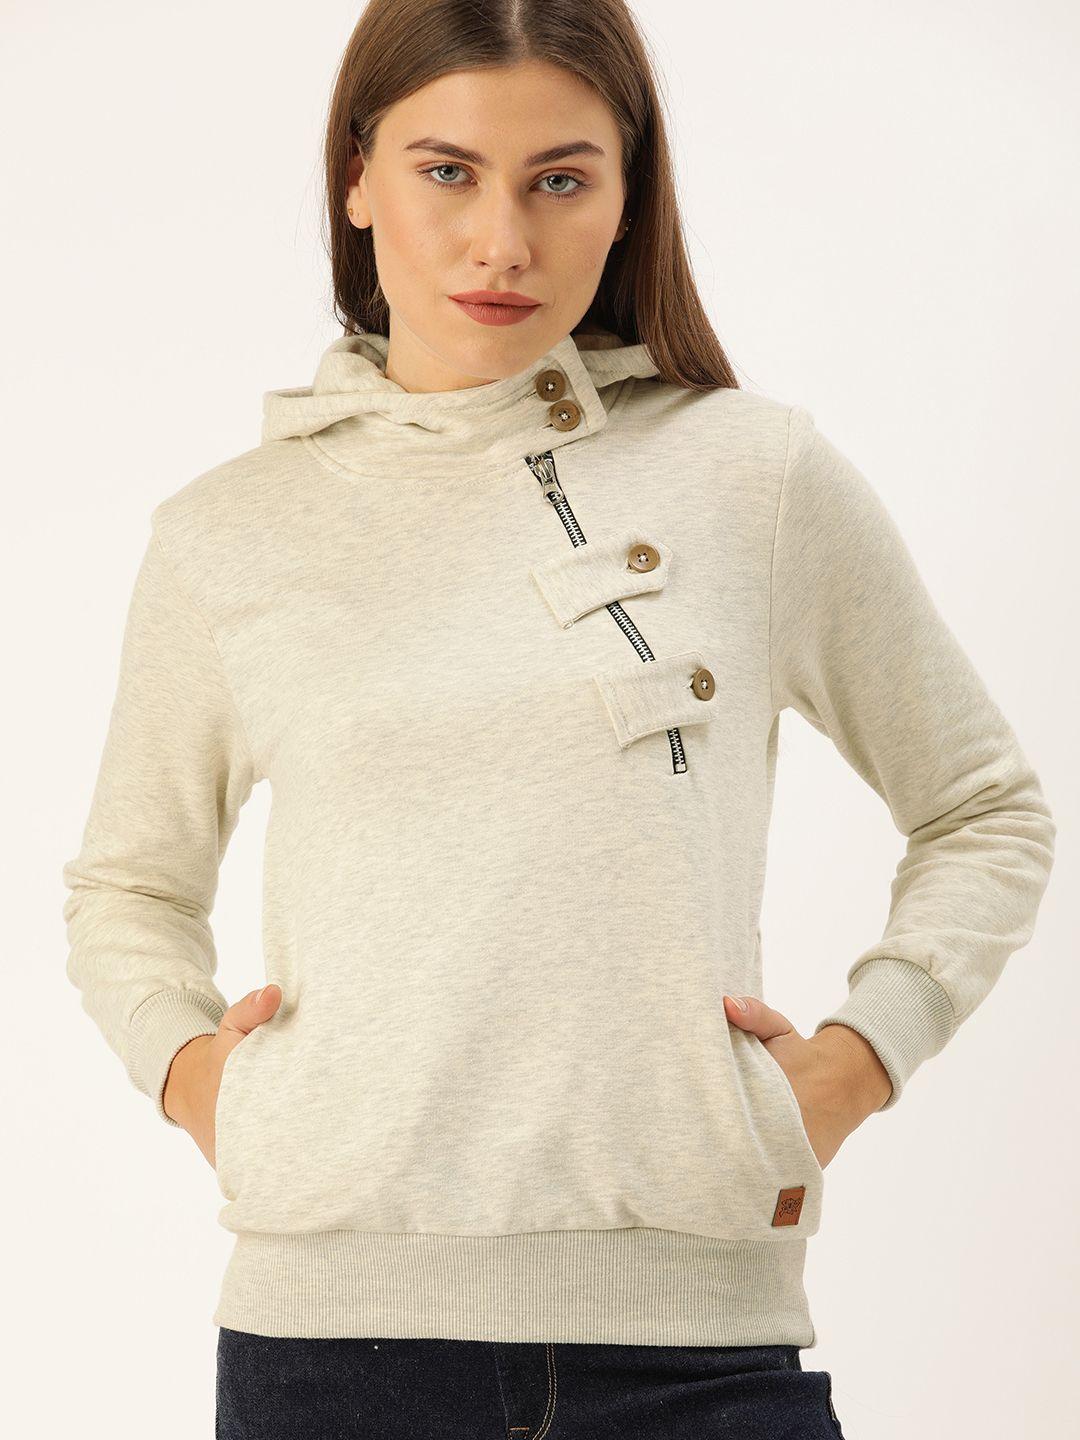 campus sutra women off-white solid hooded sweatshirt